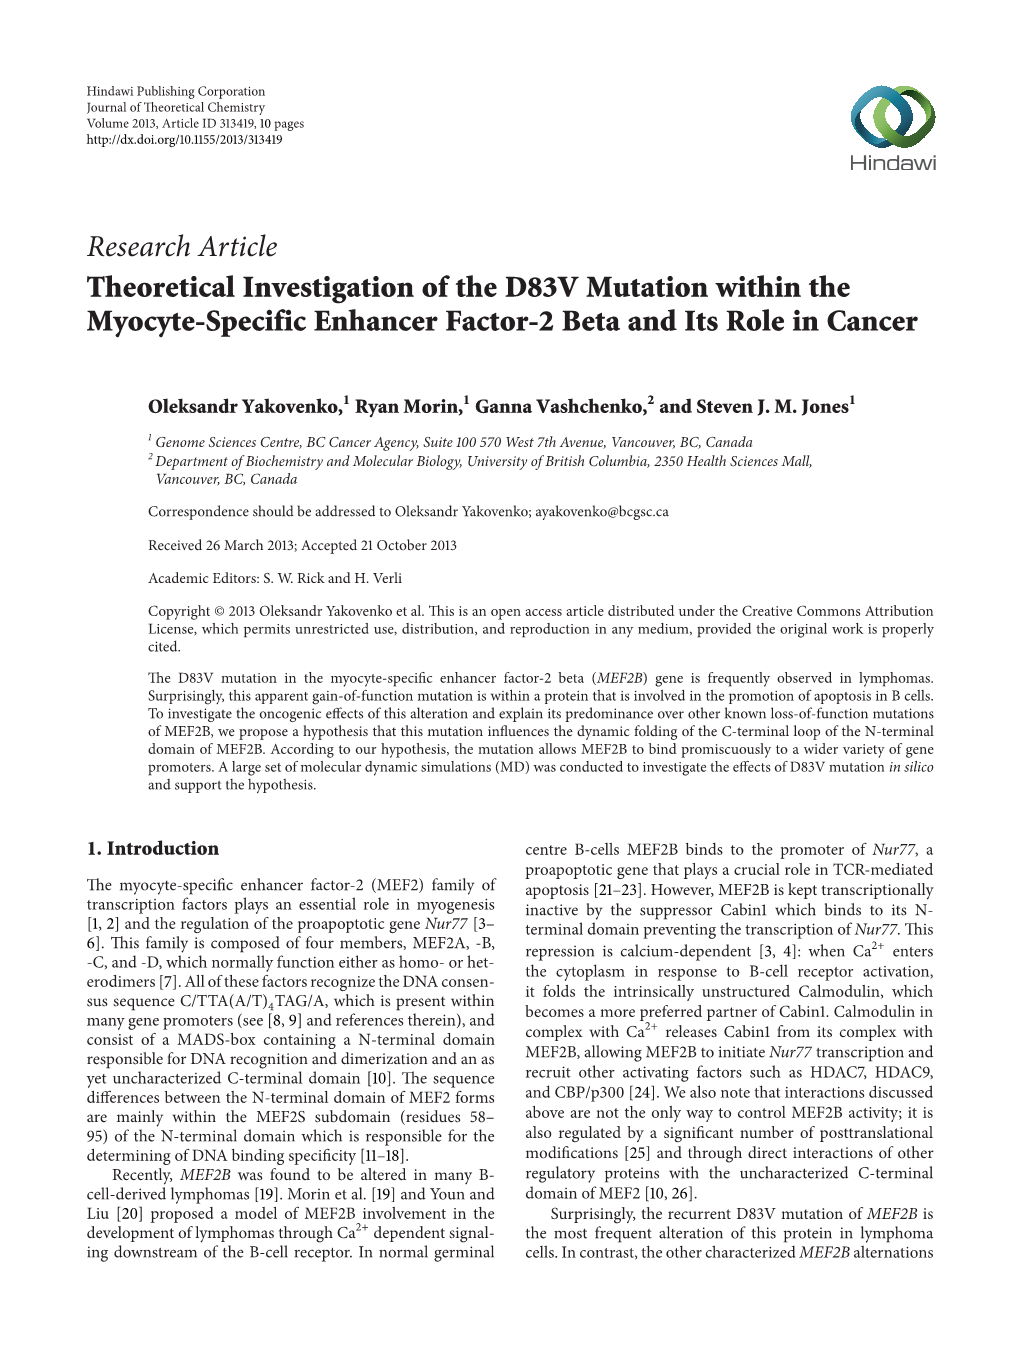 Theoretical Investigation of the D83V Mutation Within the Myocyte-Specific Enhancer Factor-2 Beta and Its Role in Cancer